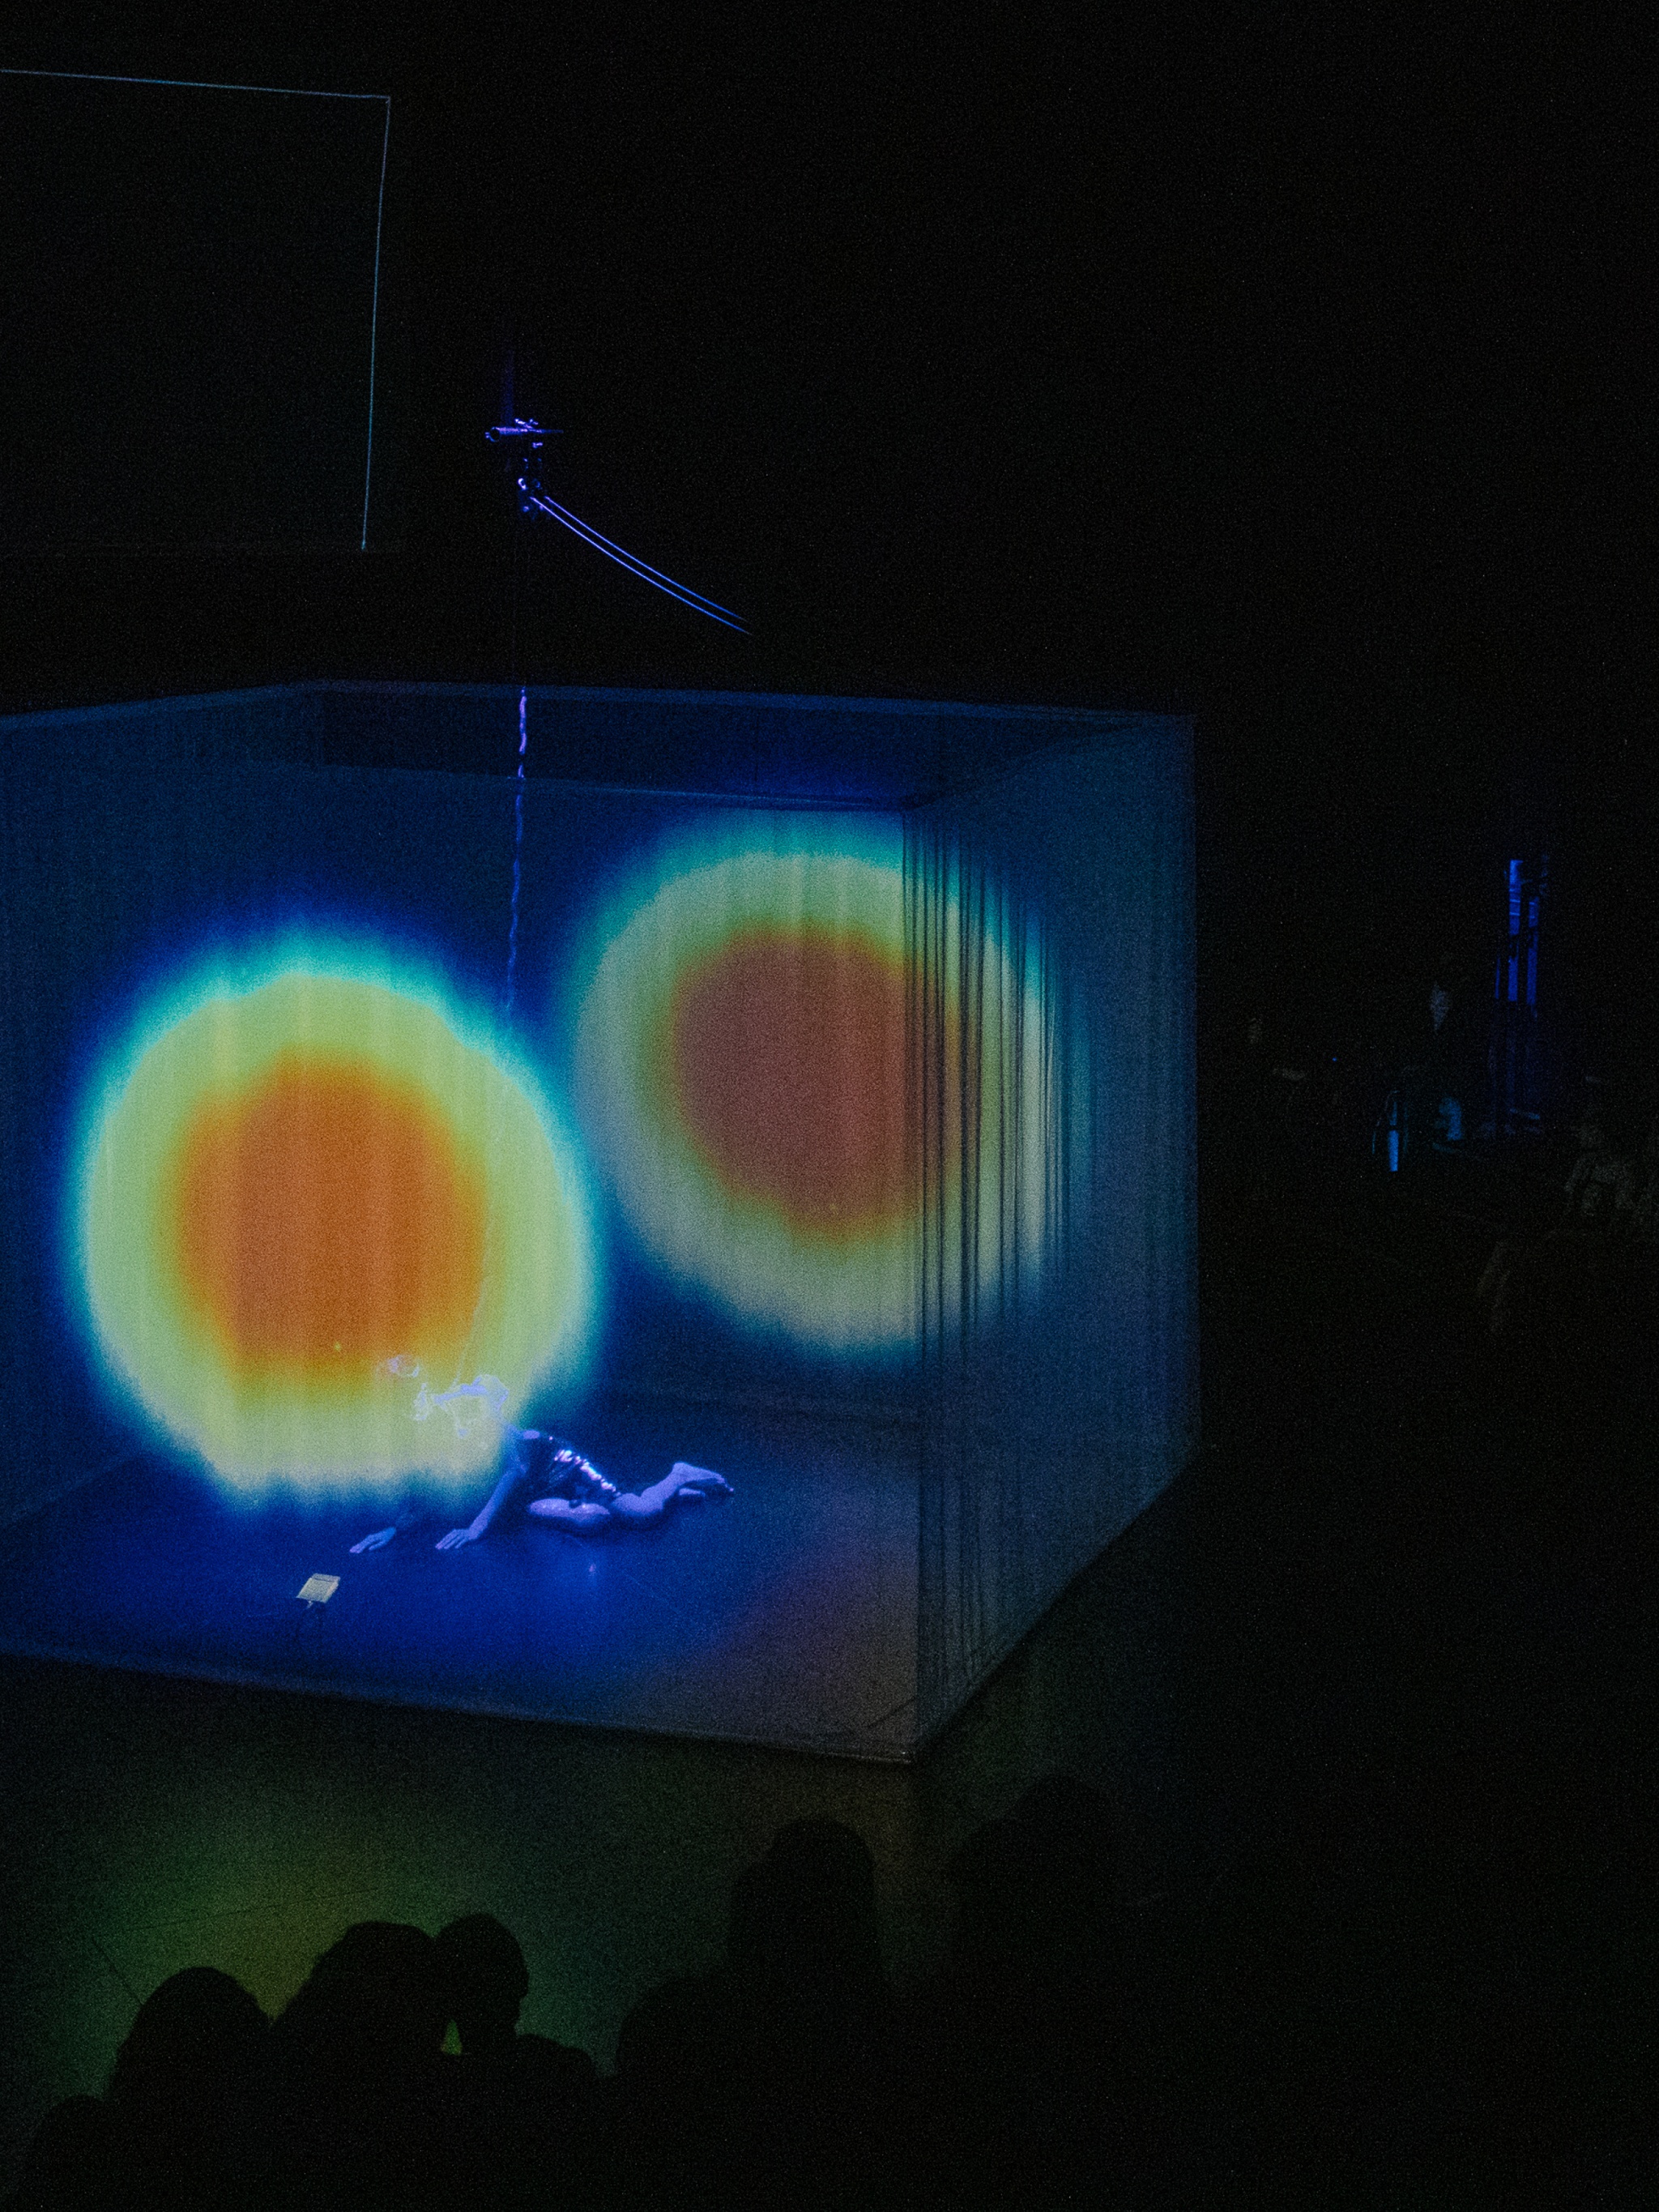 At the center of a darkened theater, sheer fabric hanging from the ceiling creates a cube on which a pulsating orange and green circle is projected. Through the fabric, a performer, the artist Yo-Yo Lin, can be seen wearing white lying on the floor.